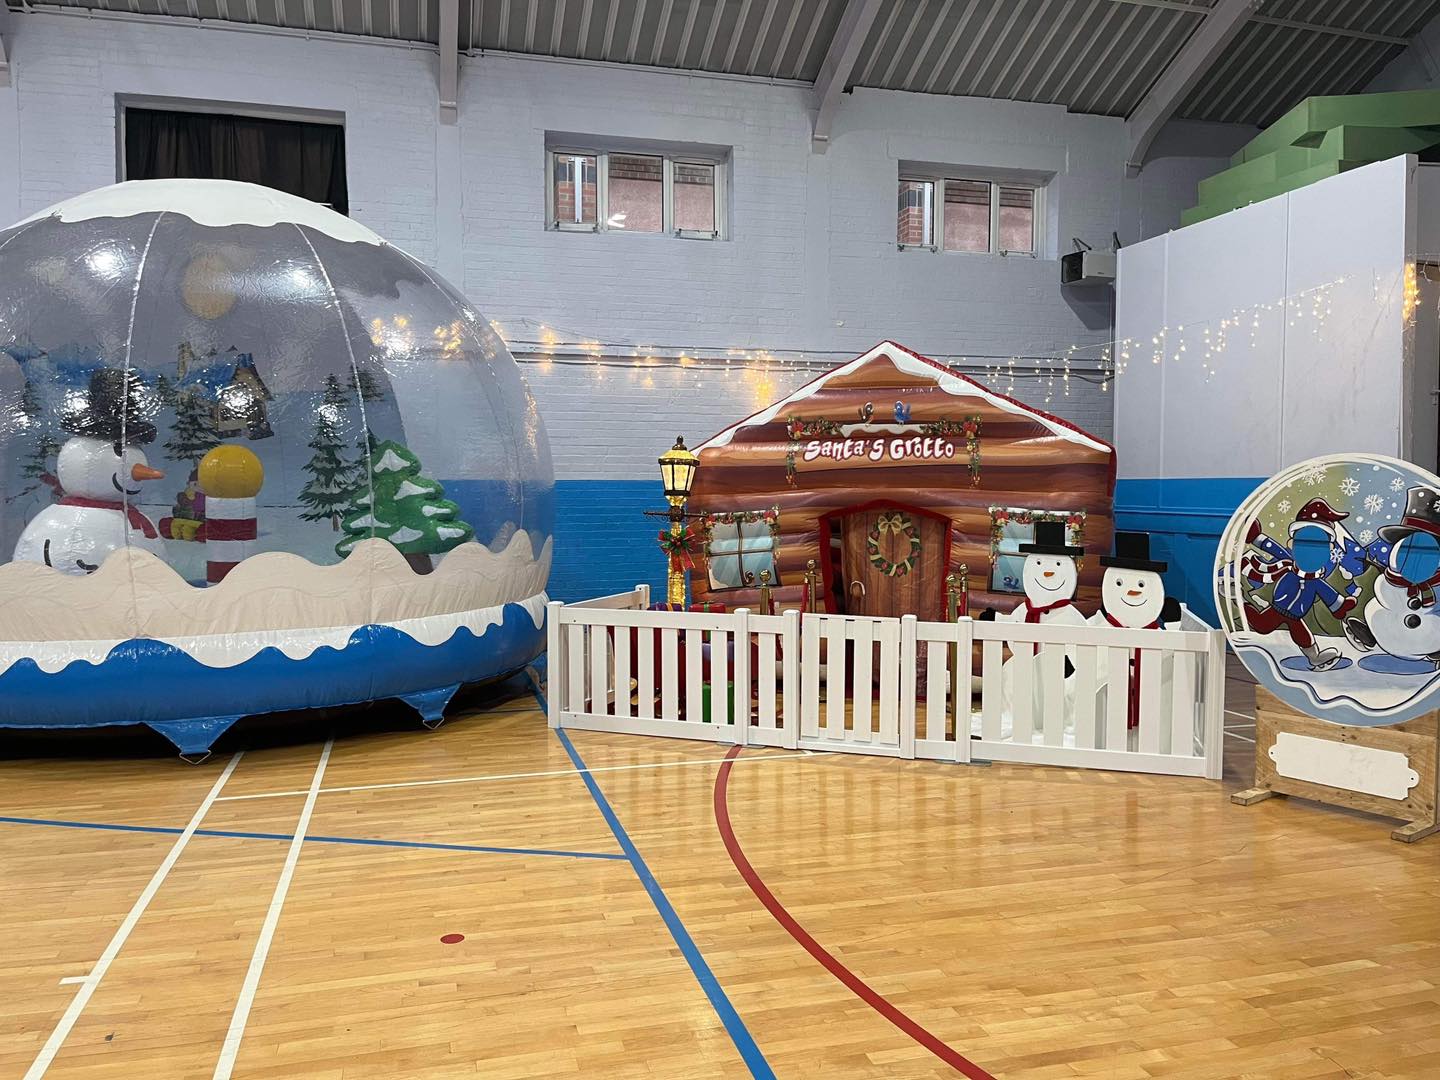 This image shows an inflatable snow globe and Santa's grotto experience supplied by SJ's Leisure in Birkenhead for a Christmas party